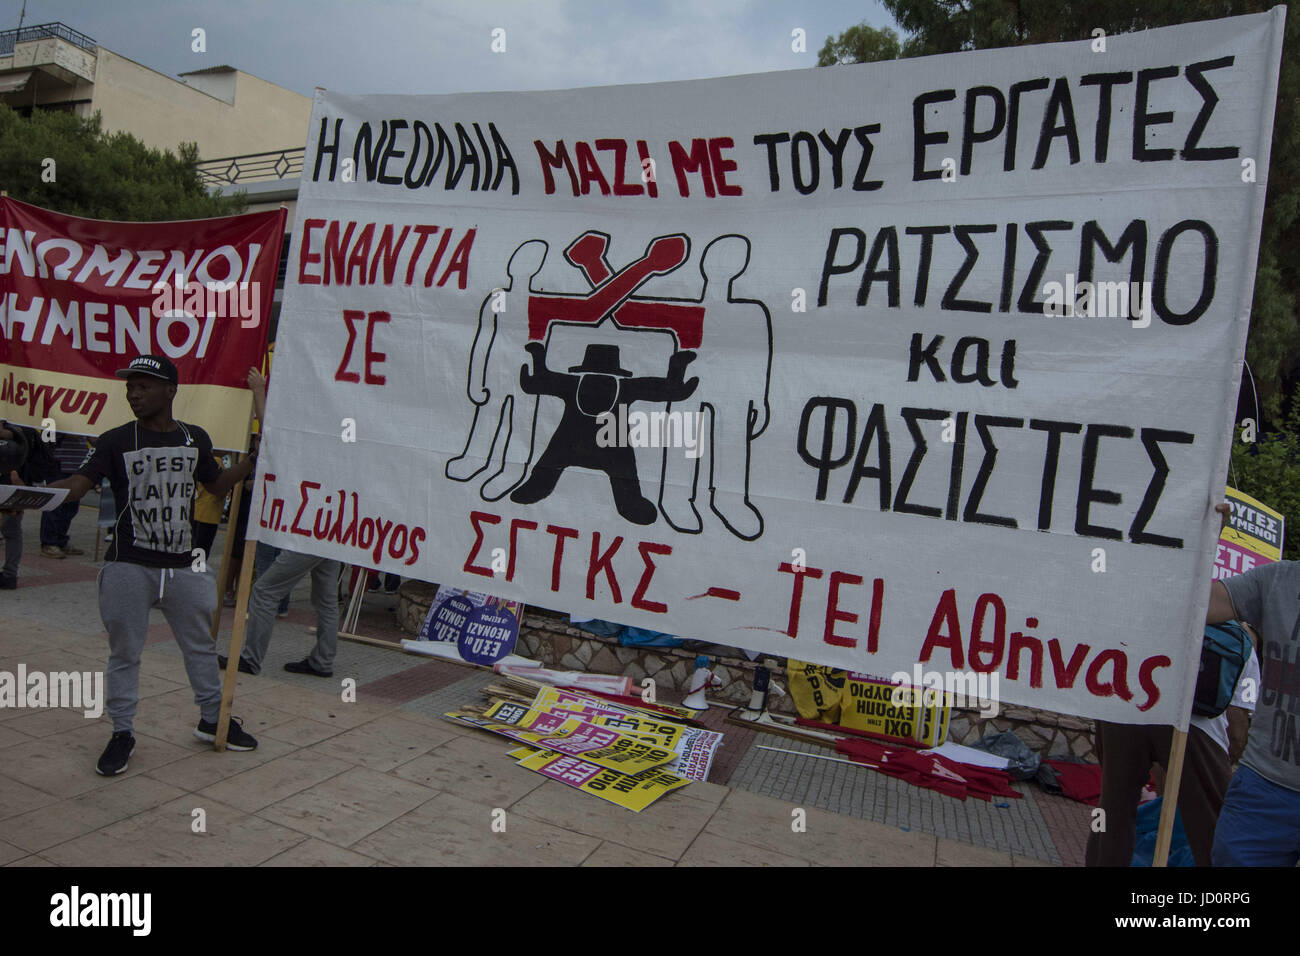 Athens, Greece. 17th June, 2017. Leftists, anarchists, anti-racism organization members and migrants march in the streets of Apropyrgos, on the outskirts of Athens, to protest against recent racist attacks to migrant workers by neo-nazi gangs. Credit: Nikolas Georgiou/ZUMA Wire/Alamy Live News Stock Photo